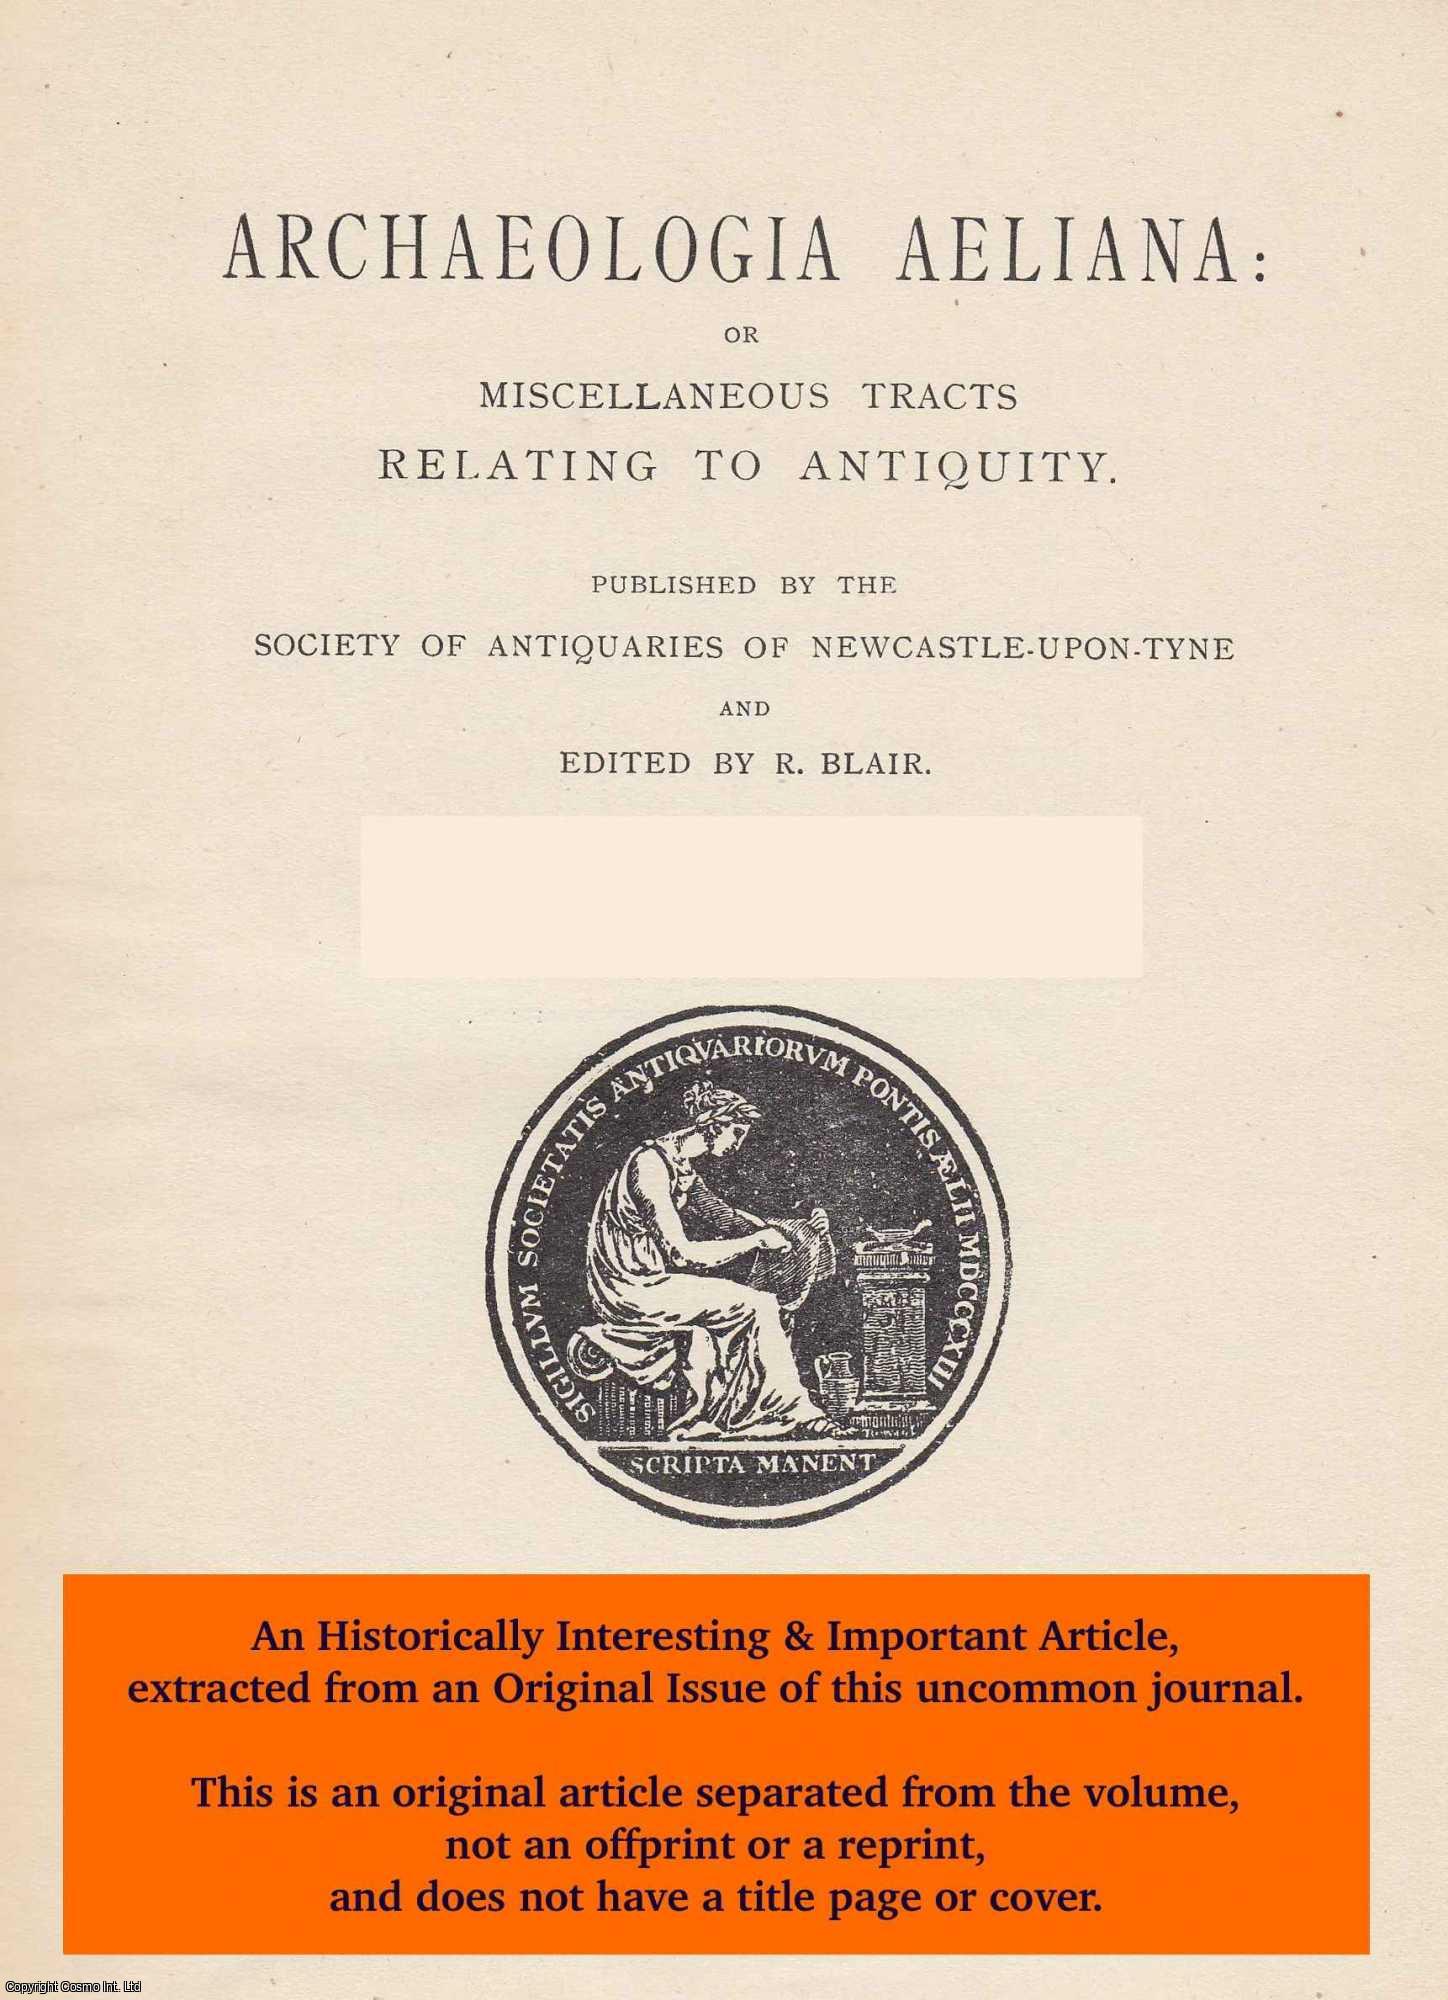 T.M. Allison, T. M. - The Flail and Its Varieties. An original article from The Archaeologia Aeliana: or Miscellaneous Tracts Relating to Antiquity, 1906.